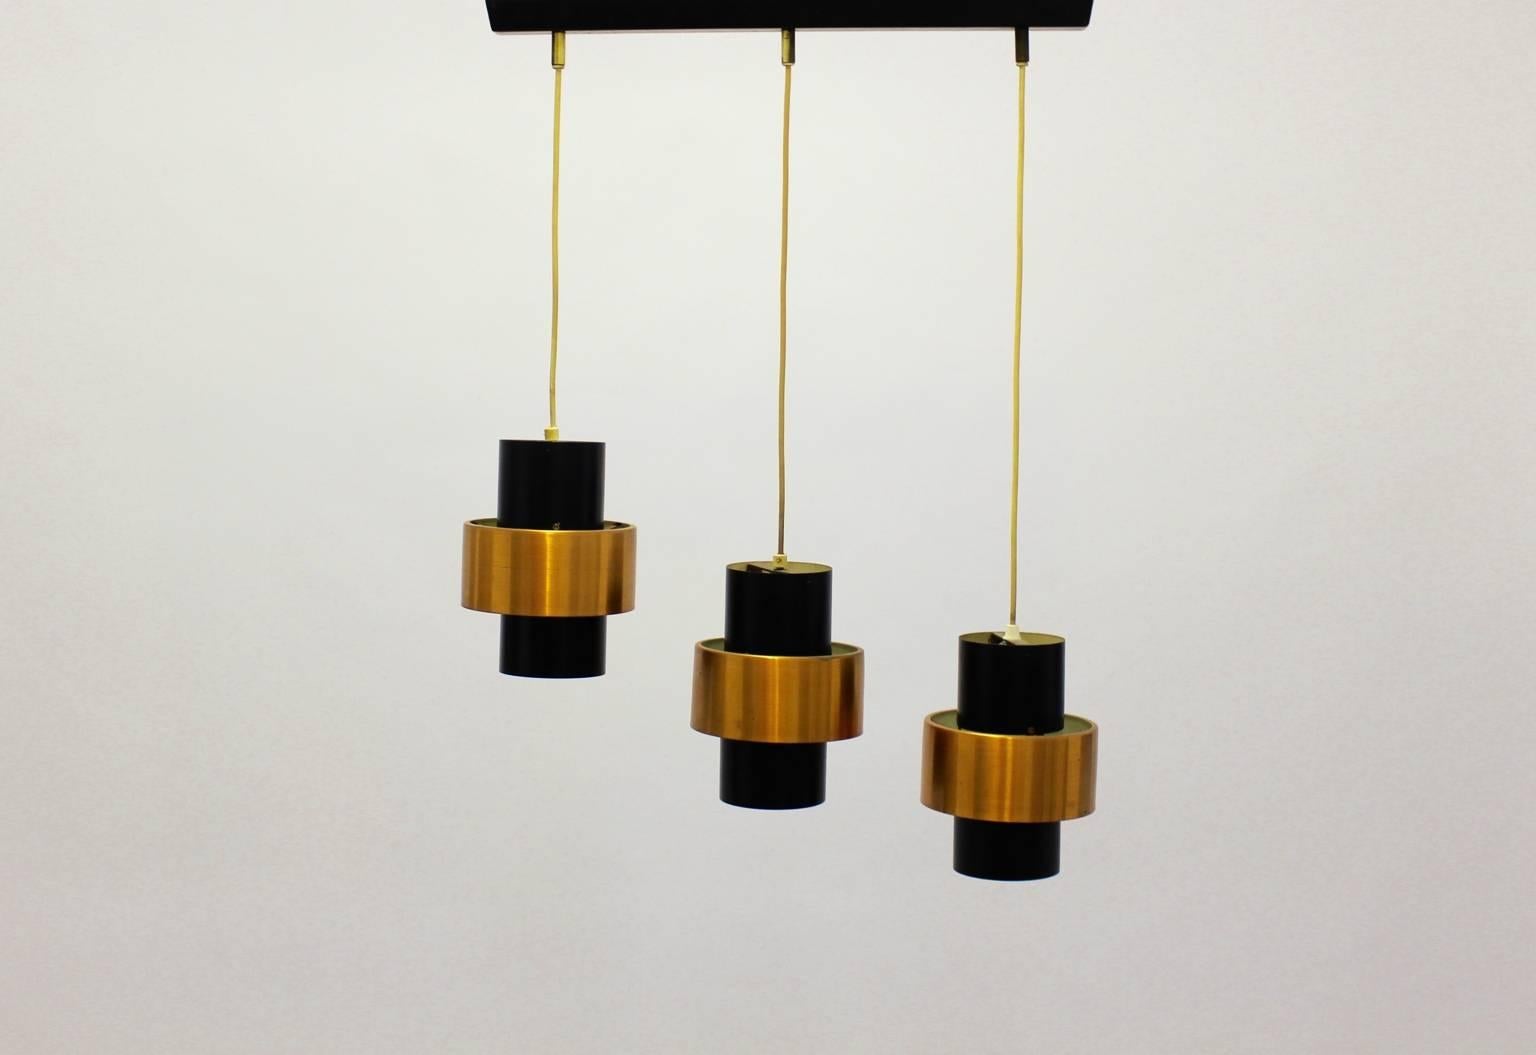 Scandinavian modern vintage chandelier by Jo Hammerborg circa 1960 with three shades shaped like tubes from copper and black lacquered metal.
The shades are fixed with cords on the trail with three fittings for Edison sockets 27.
This chandelier was